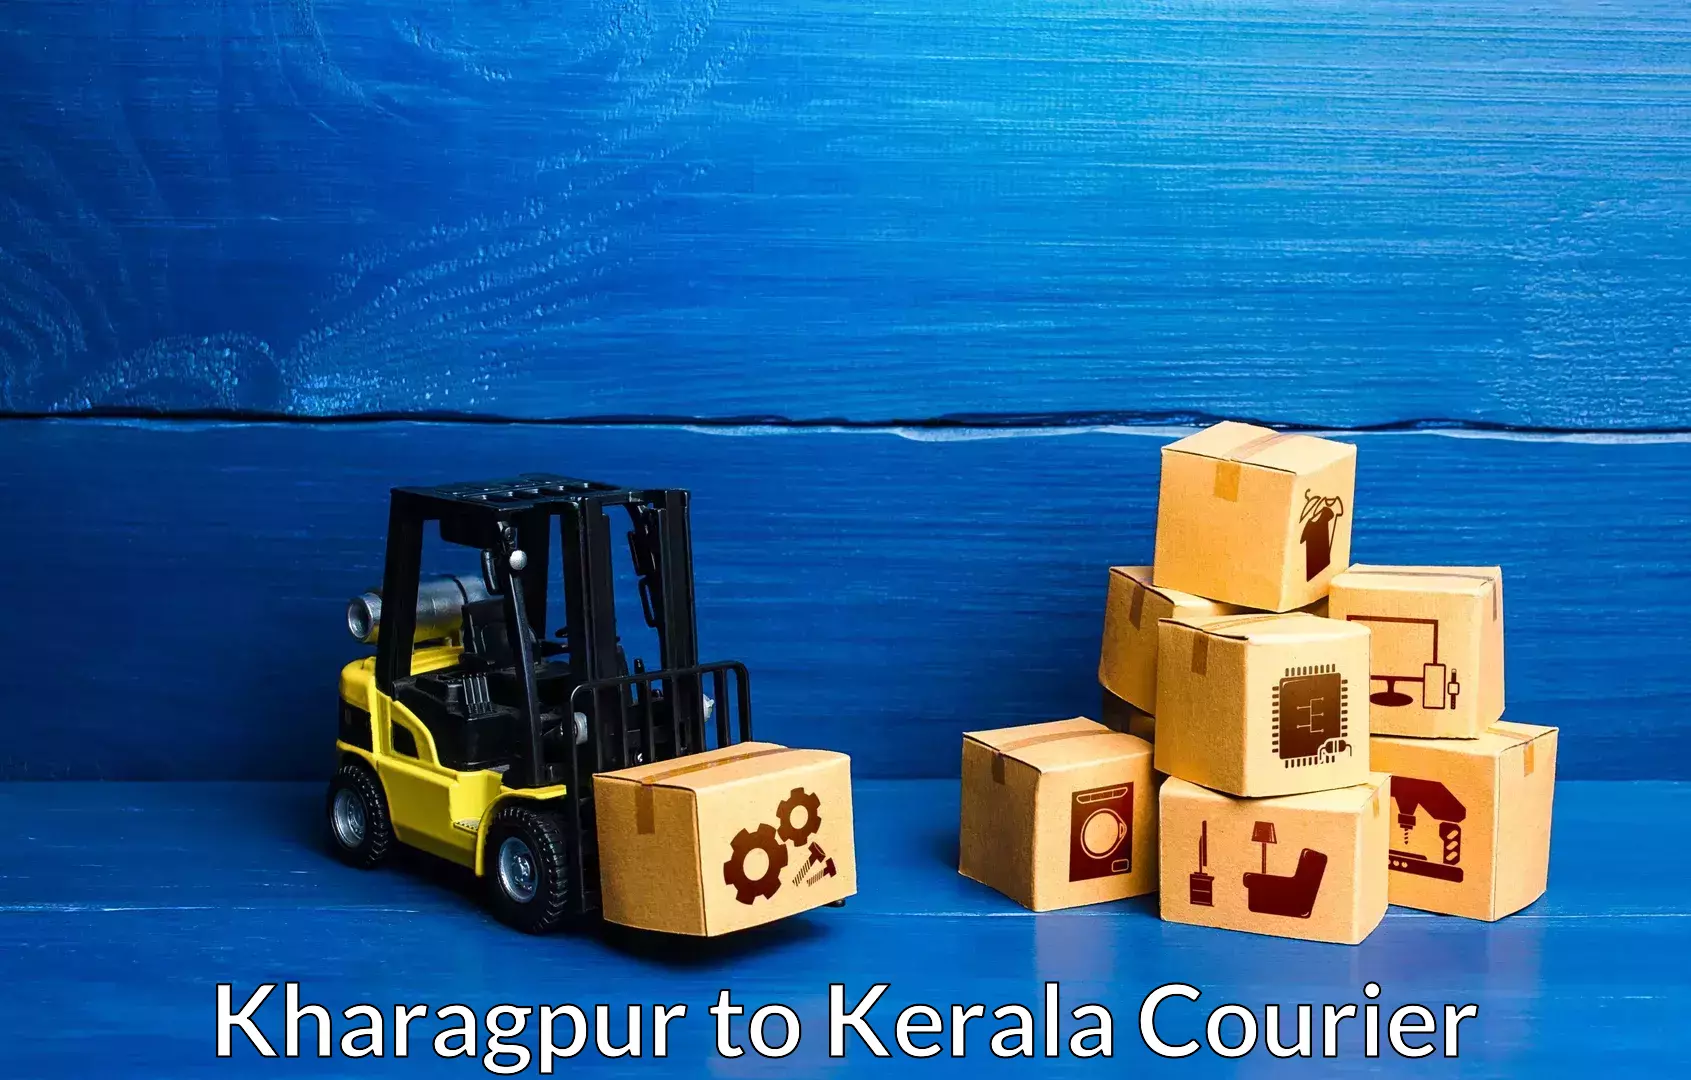 Trusted relocation experts Kharagpur to Kerala